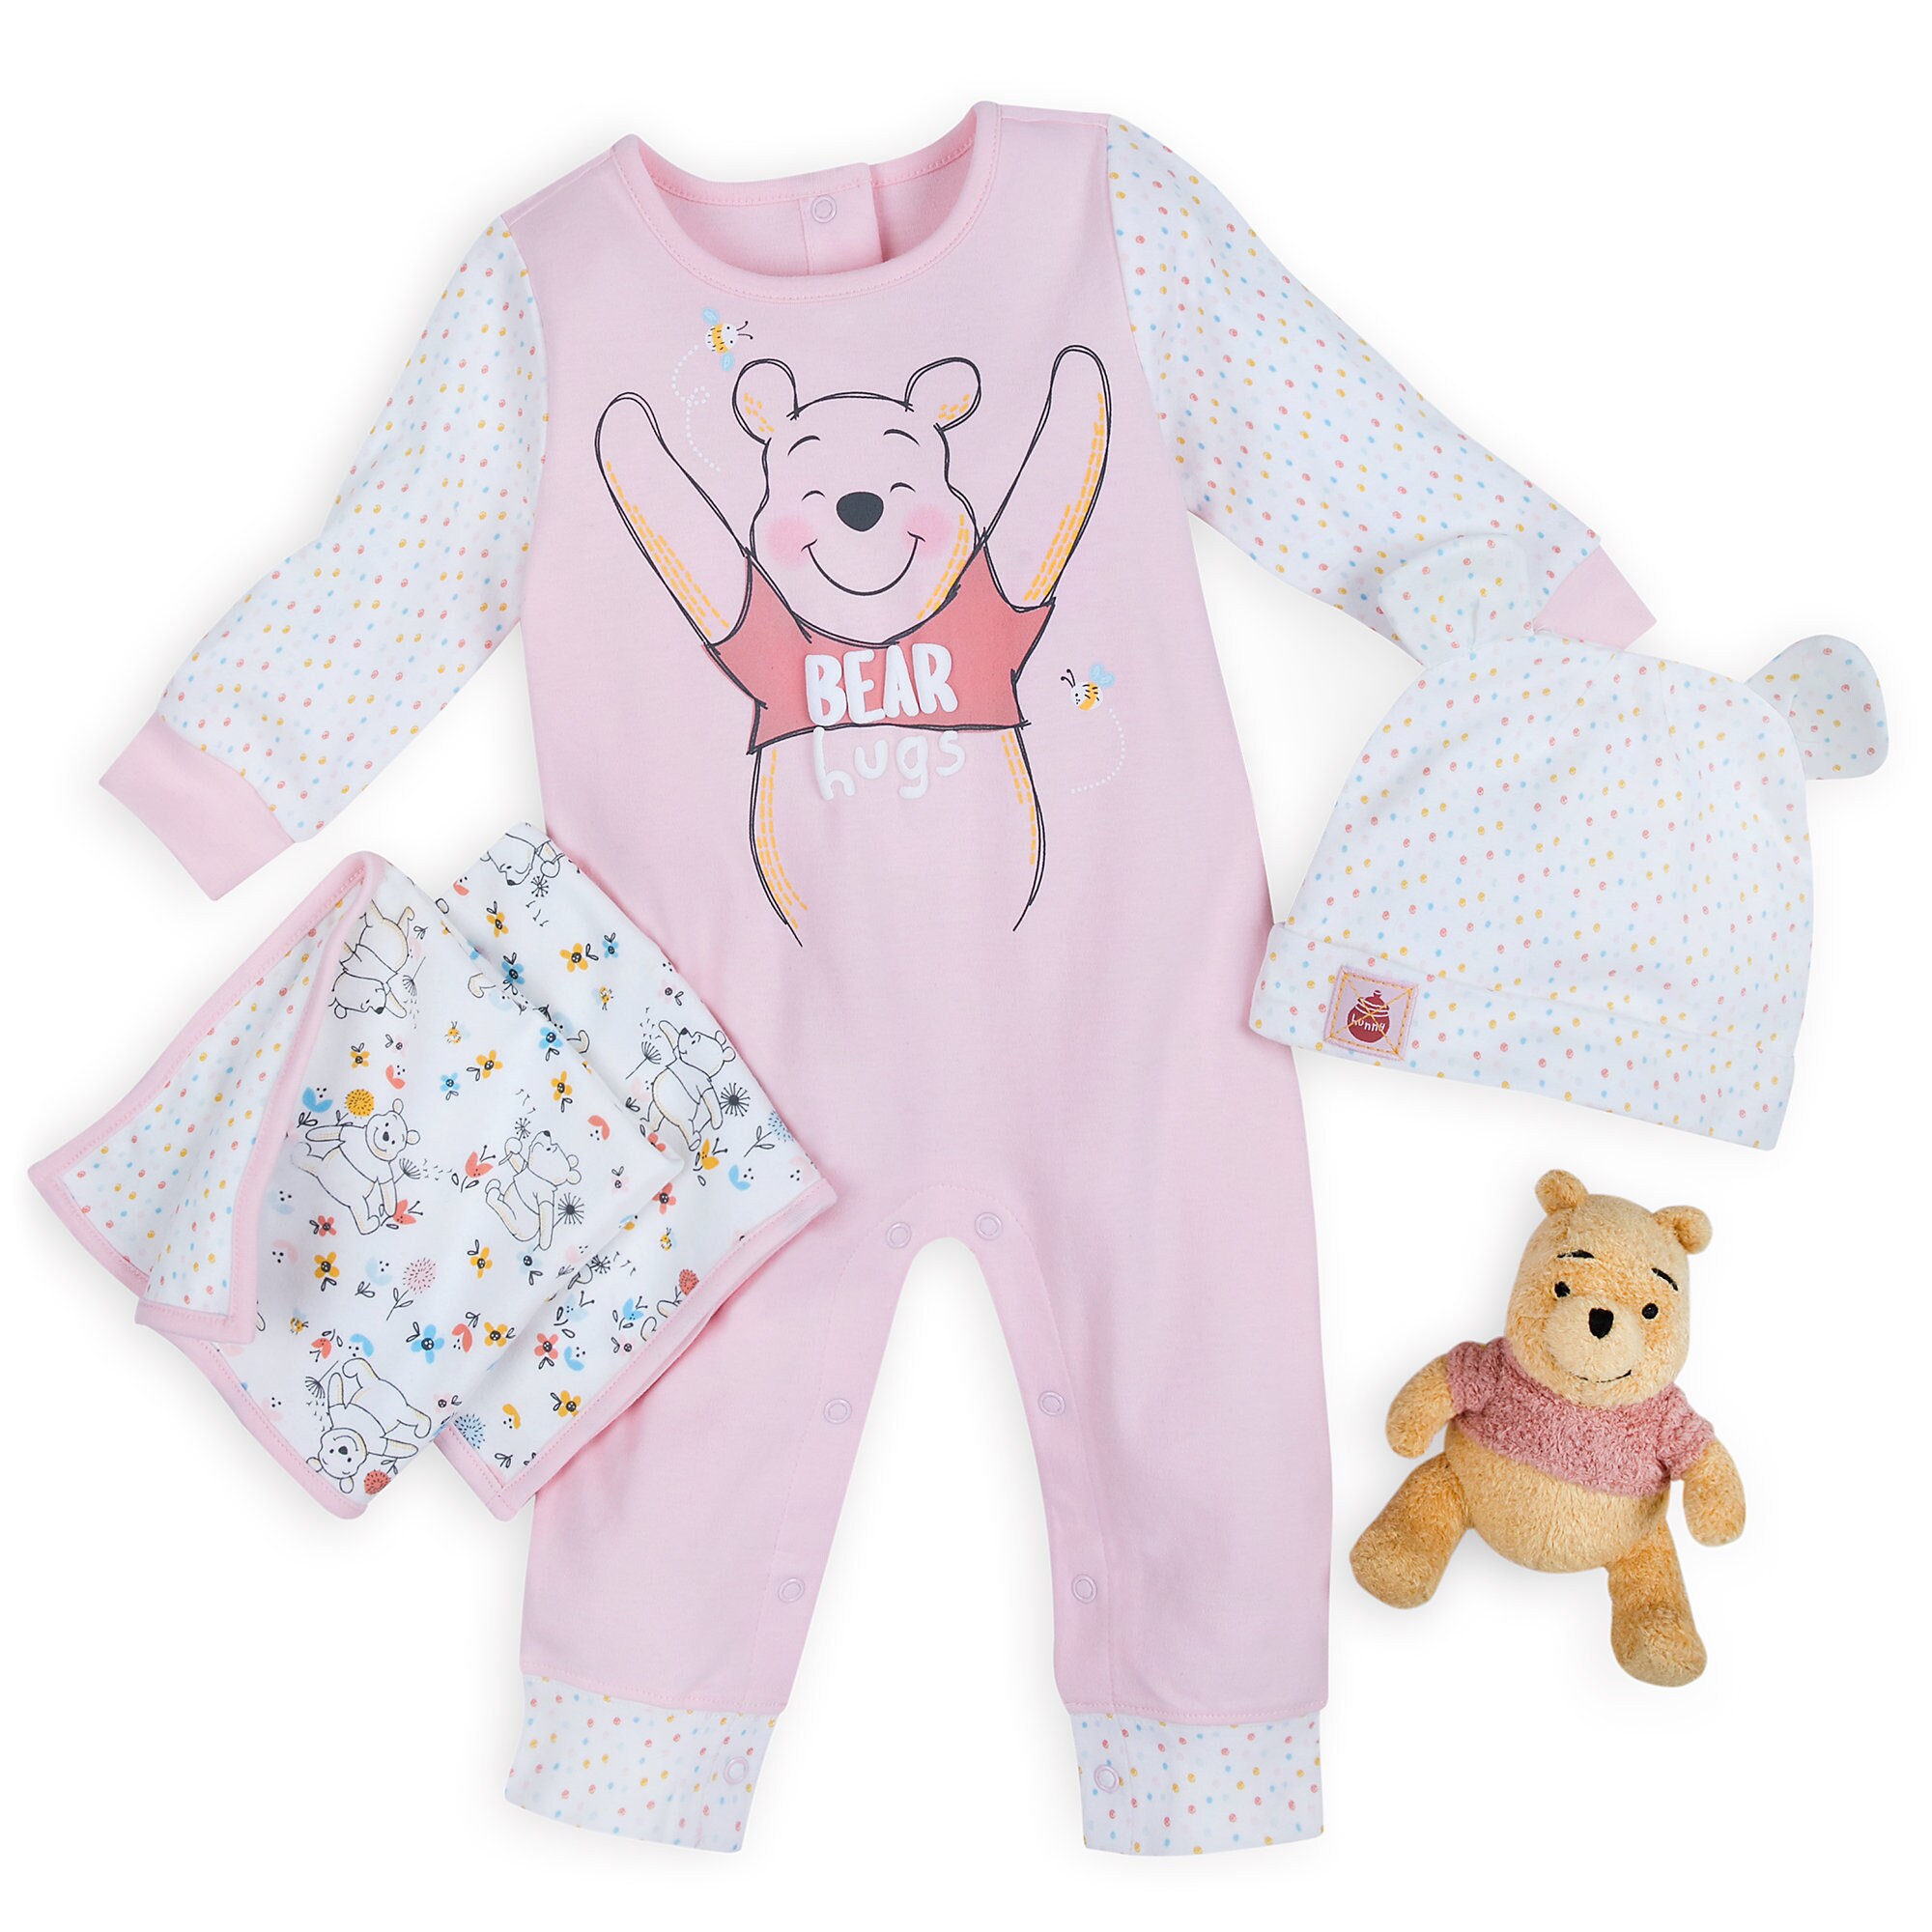 Winnie the Pooh Gift Set for Baby - Pink